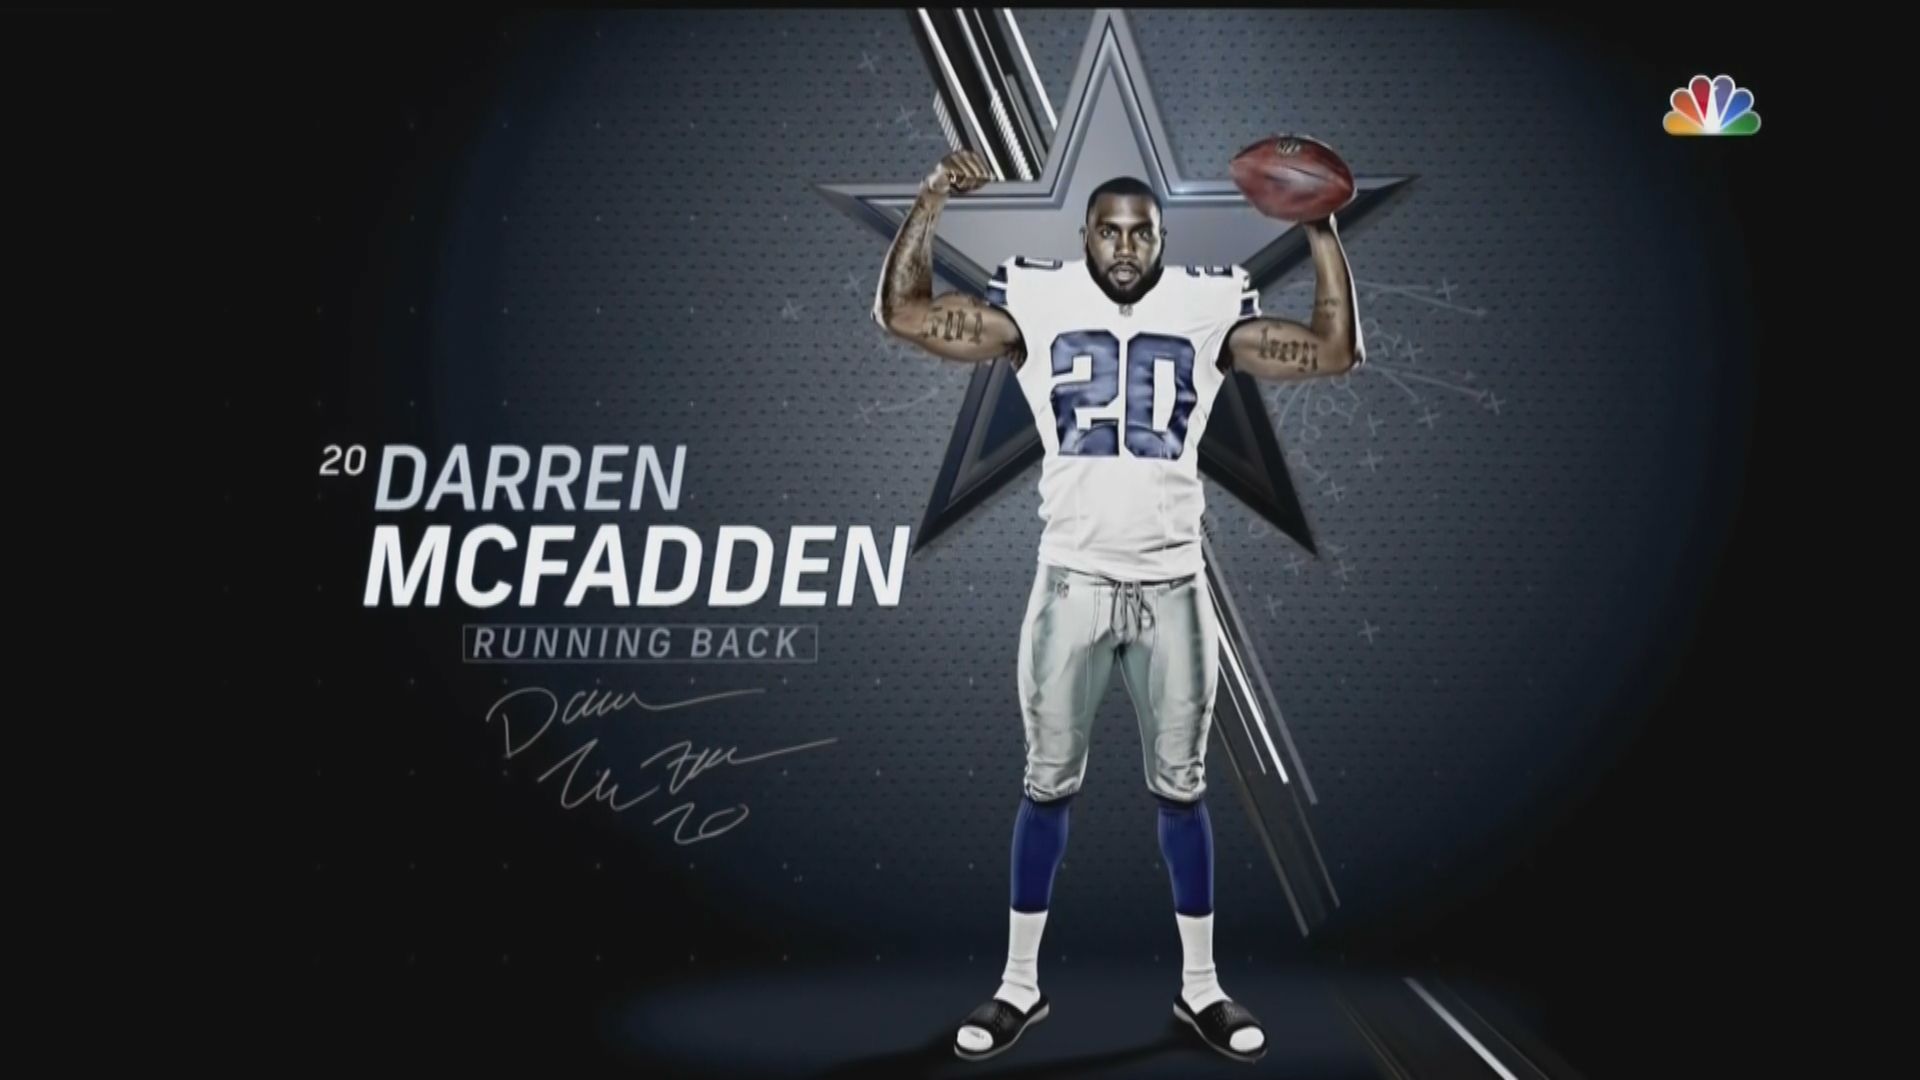 Darren Mcfadden Dresses Like Your Dad In Snf Promo Photo